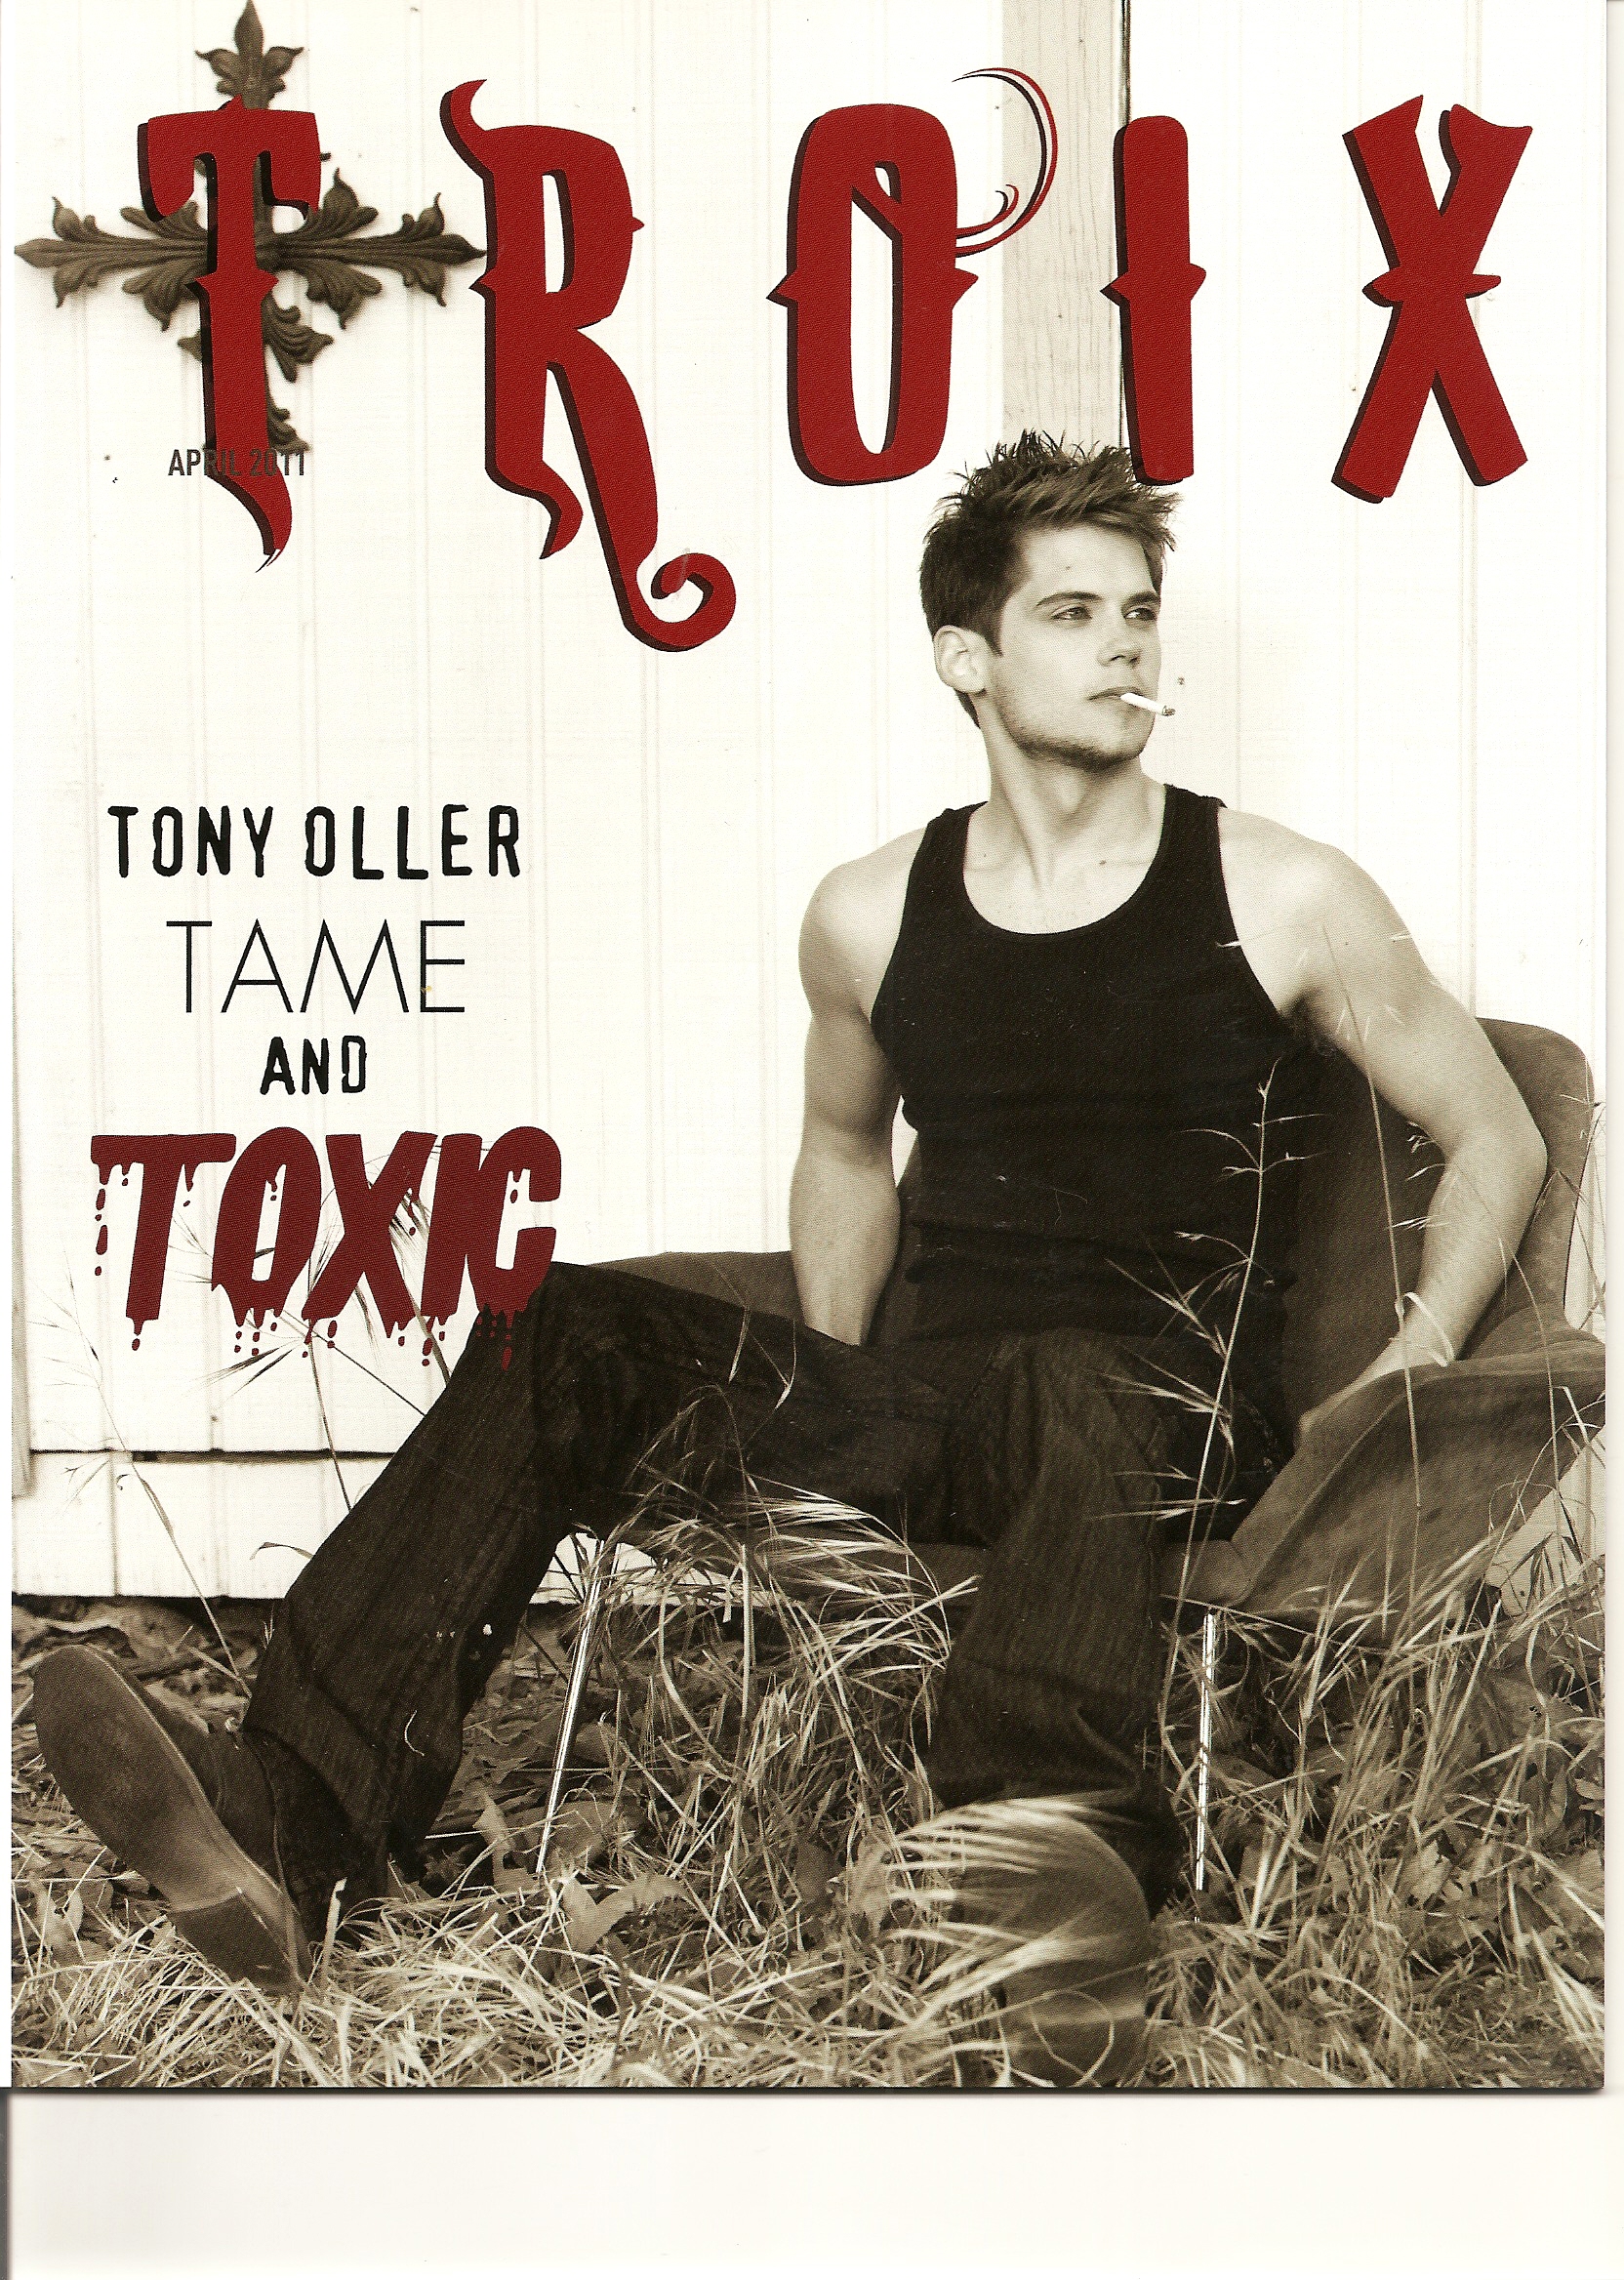 Cover photo for Troix Magazine's feature on Tony Oller, April 2011, 